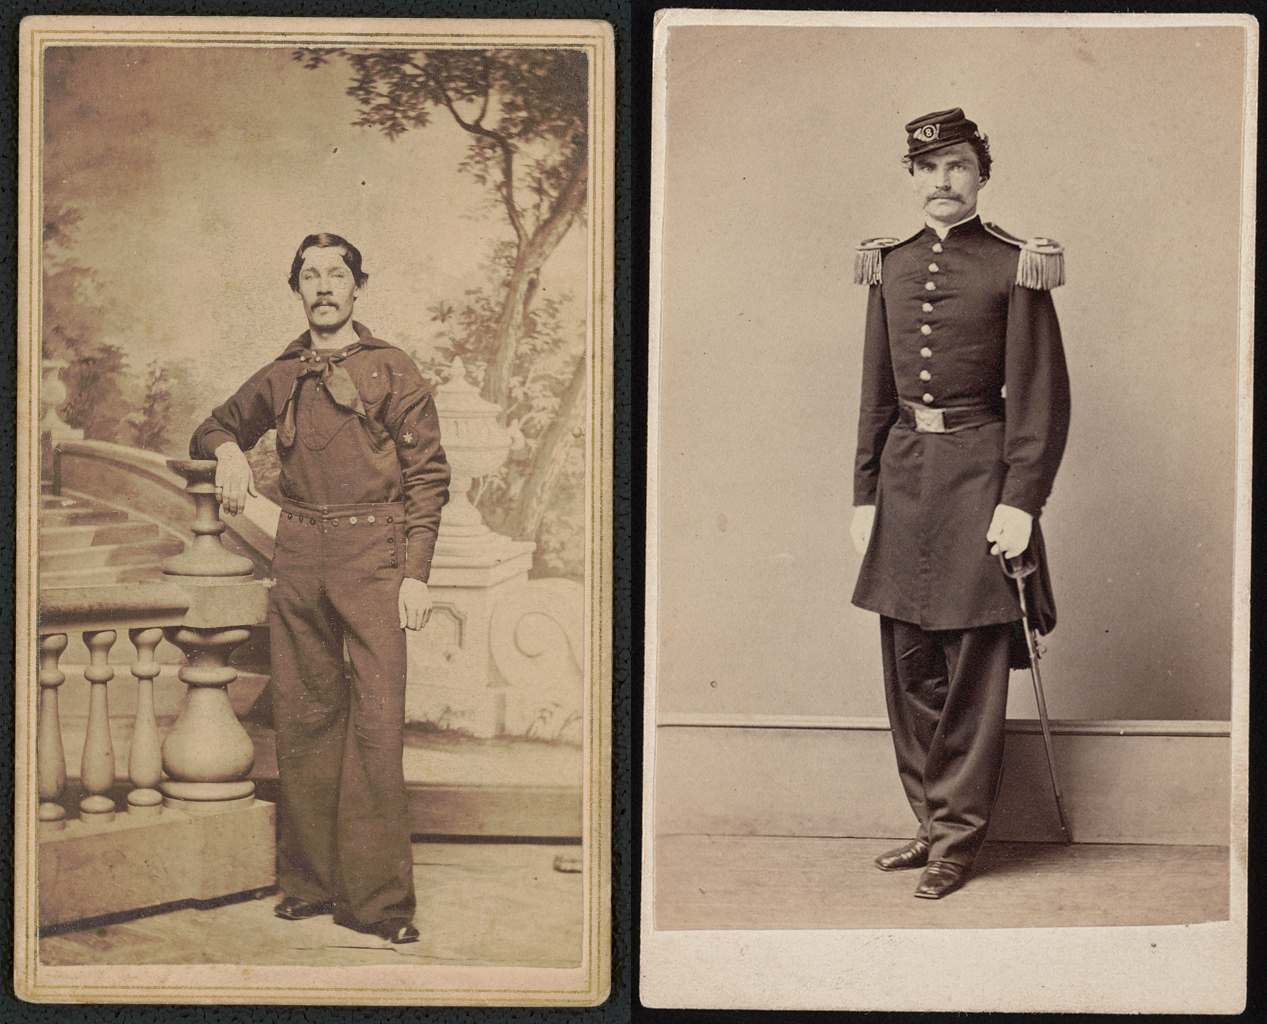 Left: Moore Bro's. Photographic Gallery, Unidentified Union sailor in uniform in front of painted backdrop showing walkway and trees, c. 1861–65, albumen print on card (Library of Congress); right: Israel & Co., First Lieutenant Patrick Boyce of Co. F, 8th Regular Army Infantry Regiment in uniform with sword, c. 1861–65 (Library of Congress)